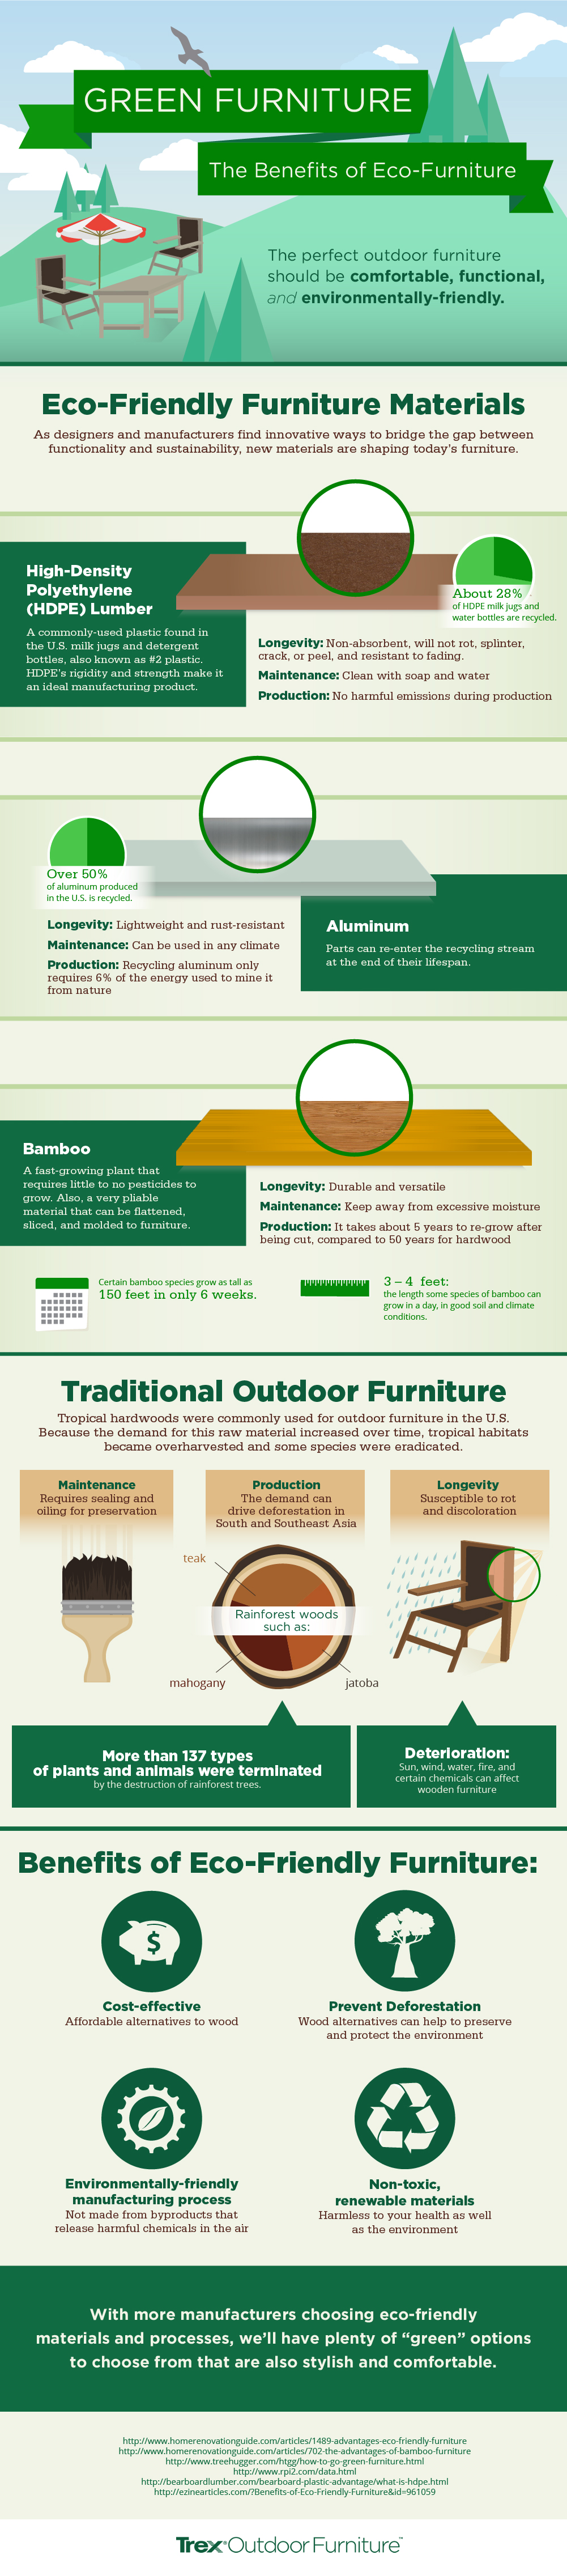 green-furniture-infographic-trex-outdoor-furniture